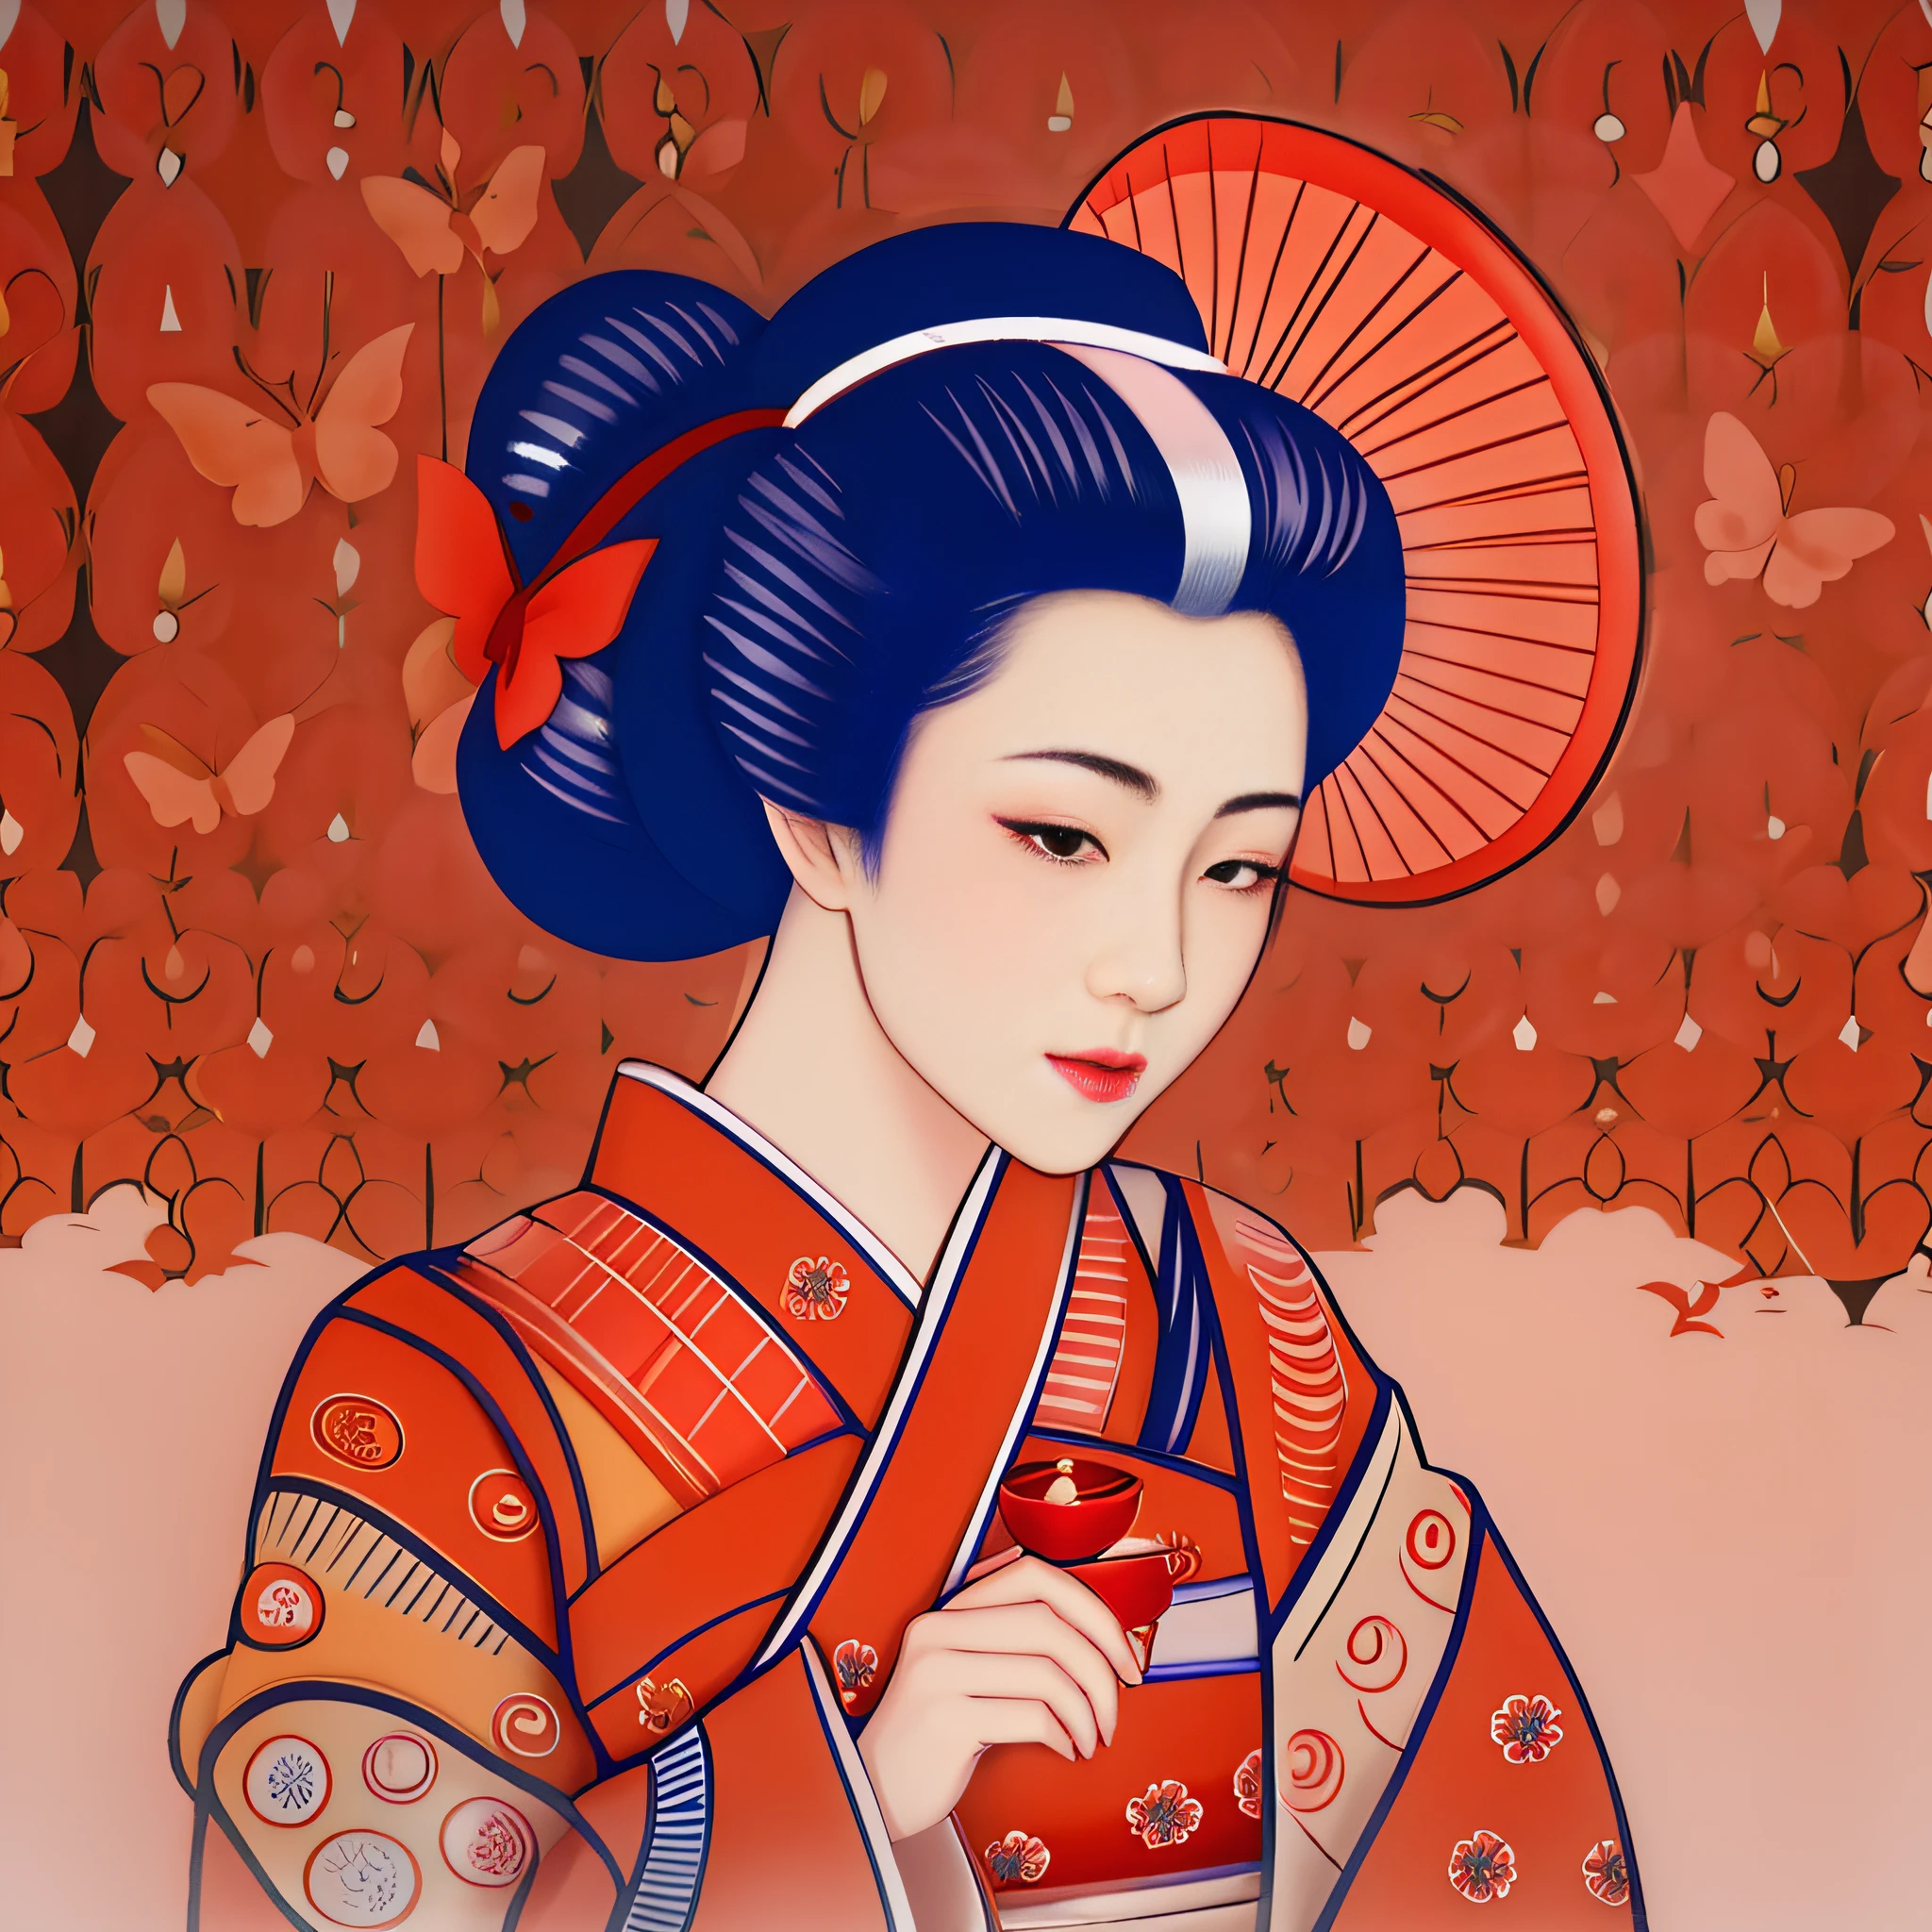 There is a woman in a kimono with a red umbrella, japanese art style, geisha japonesa, Retrato de uma geisha bonita, beauty geisha, Retrato da geisha, Inspired by Uemura Shōen, female geisha girl, in the art style of ukiyo - e, Retrato de uma geisha, japanese art, elegant japanese woman, geisha.